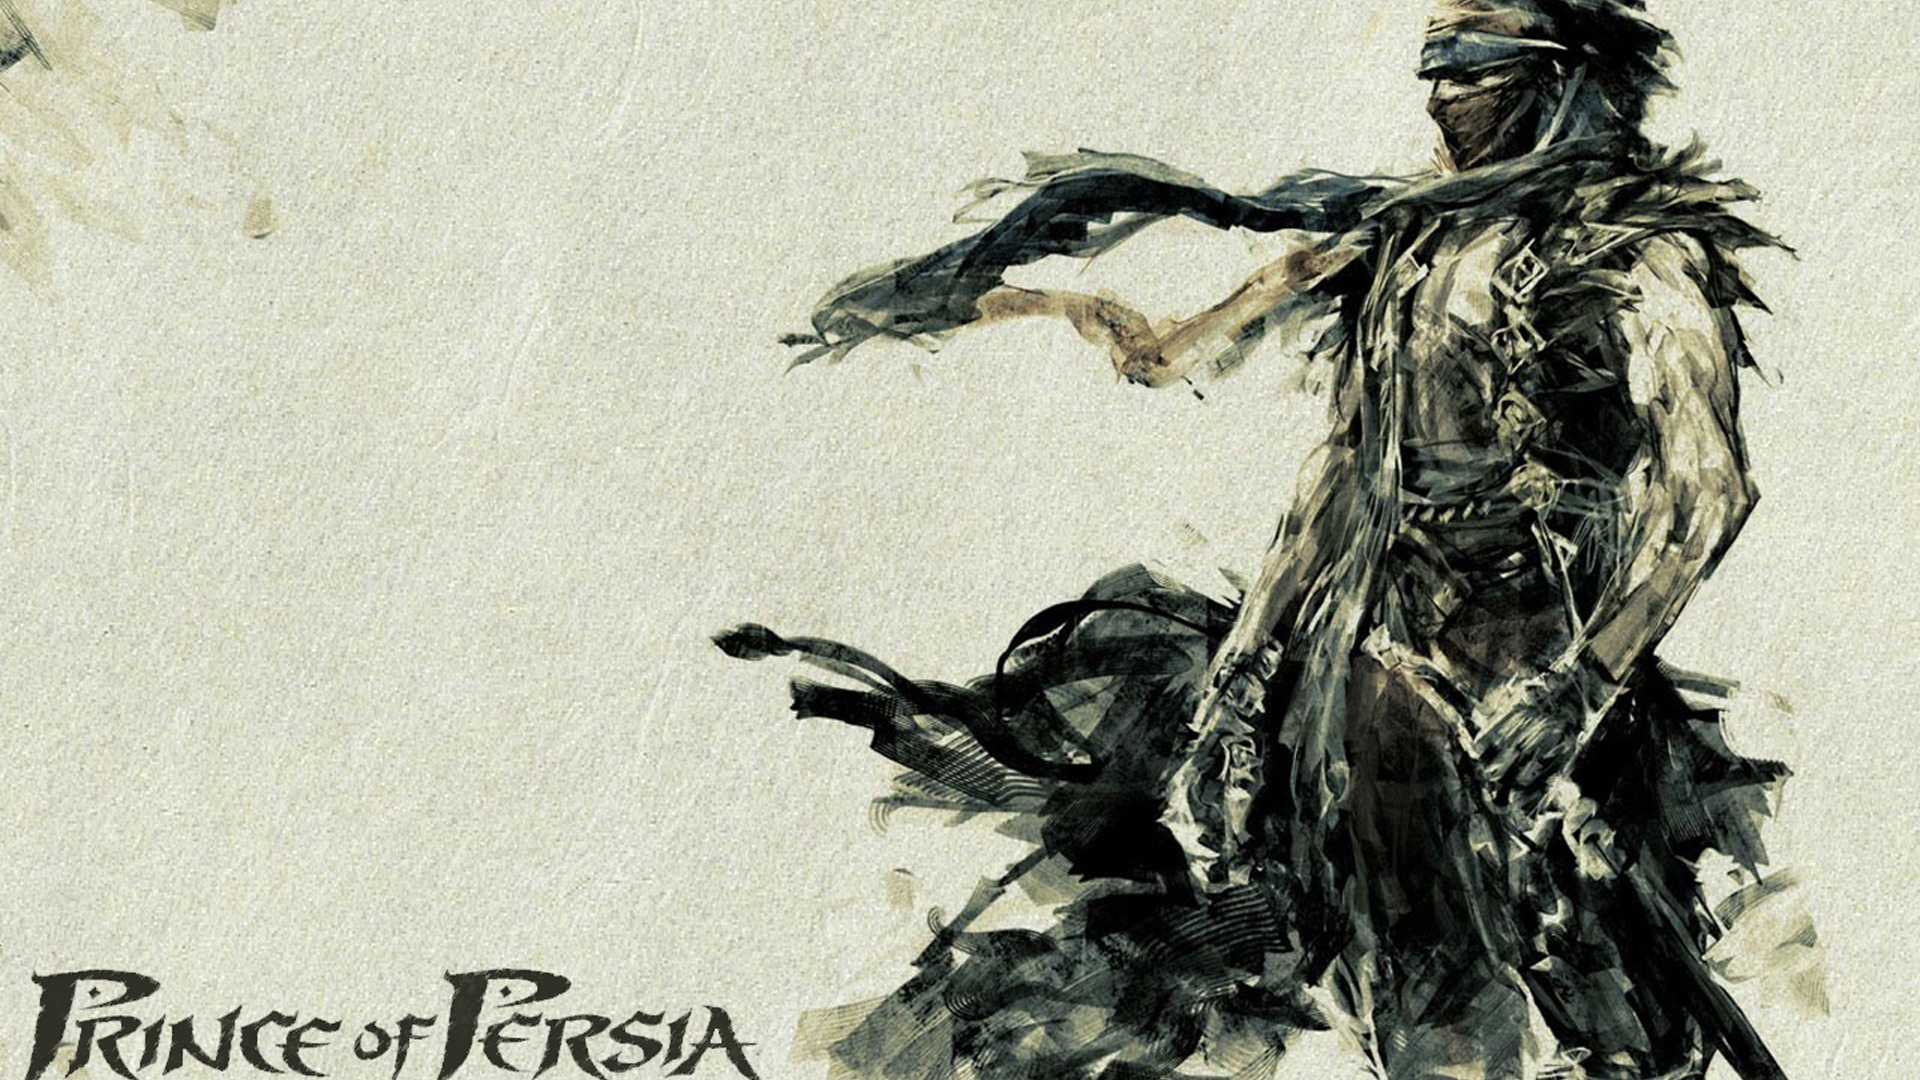 Prince of Persia Drawing for 1920 x 1080 HDTV 1080p resolution